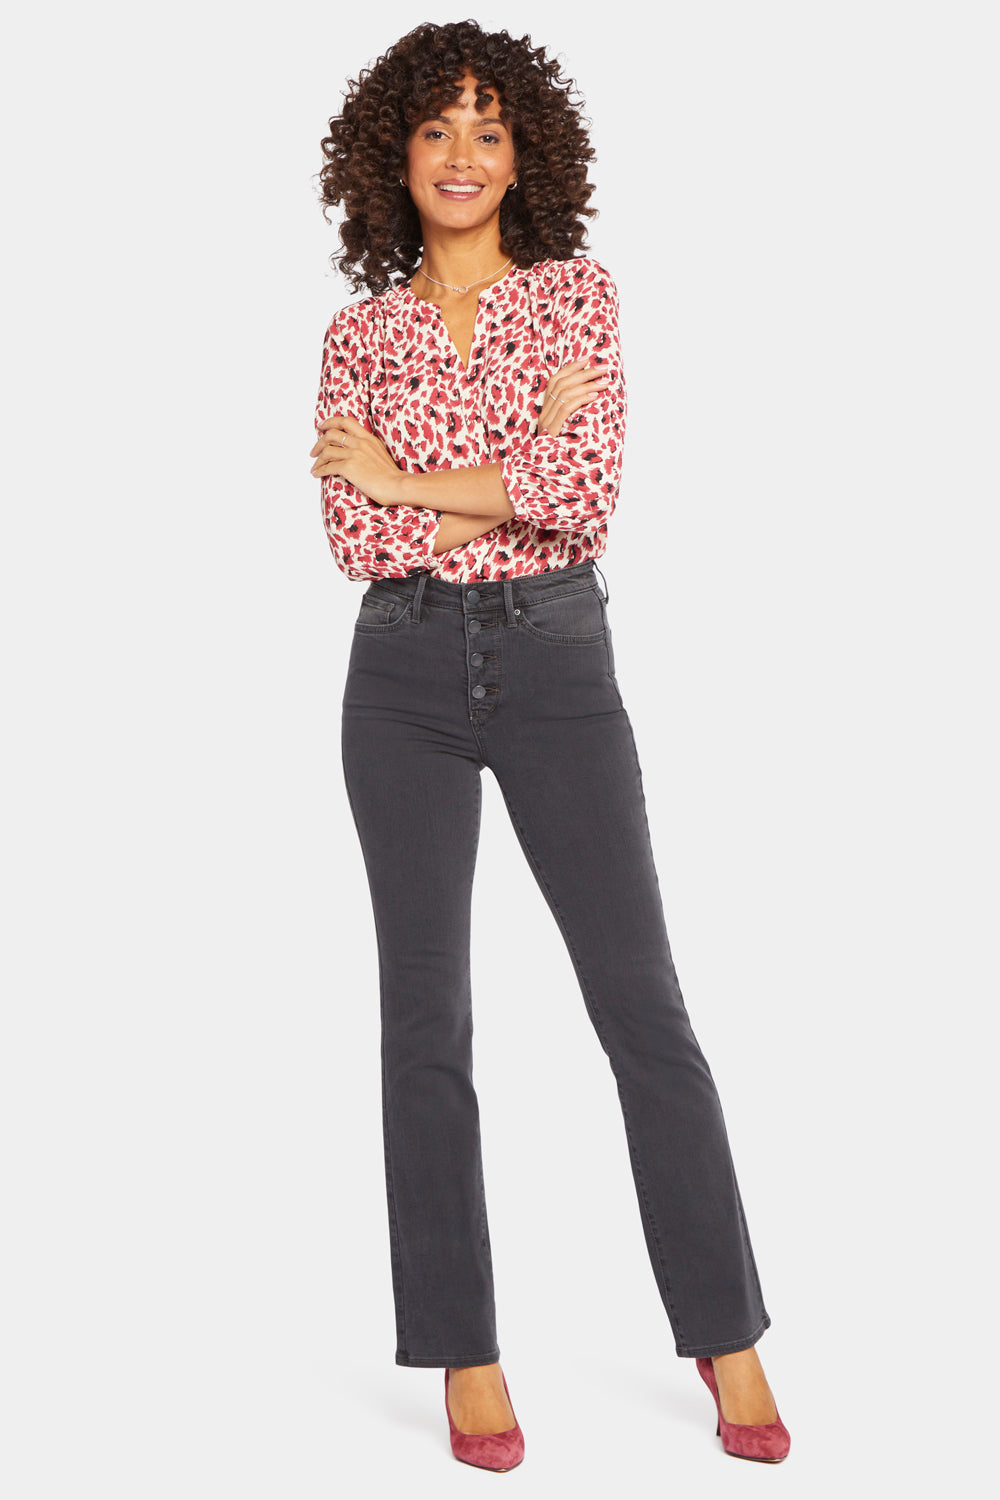 NYDJ Barbara Bootcut Jeans In Petite In Sure Stretch® Denim With Exposed Button Fly - Sierra